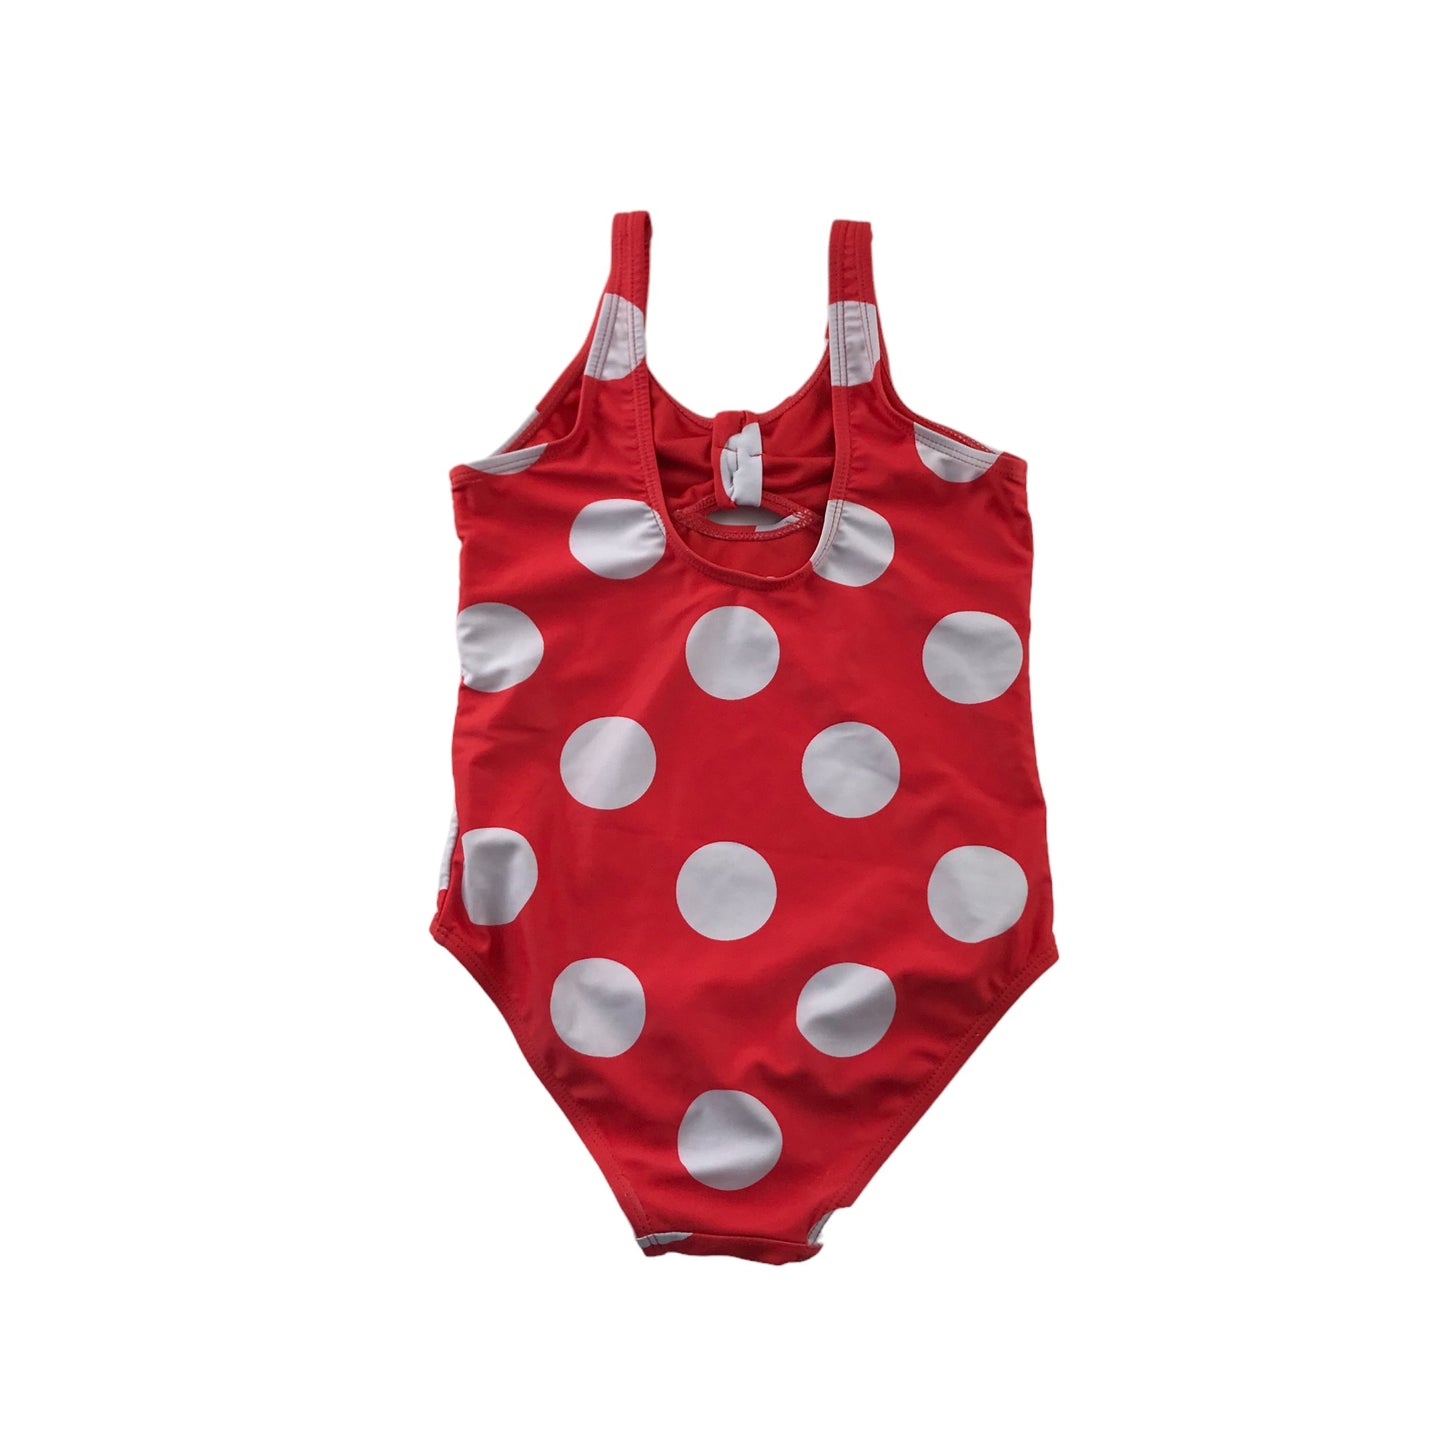 Tu Swimsuit Age 8 Red and White Polka Dot One Piece Cossie